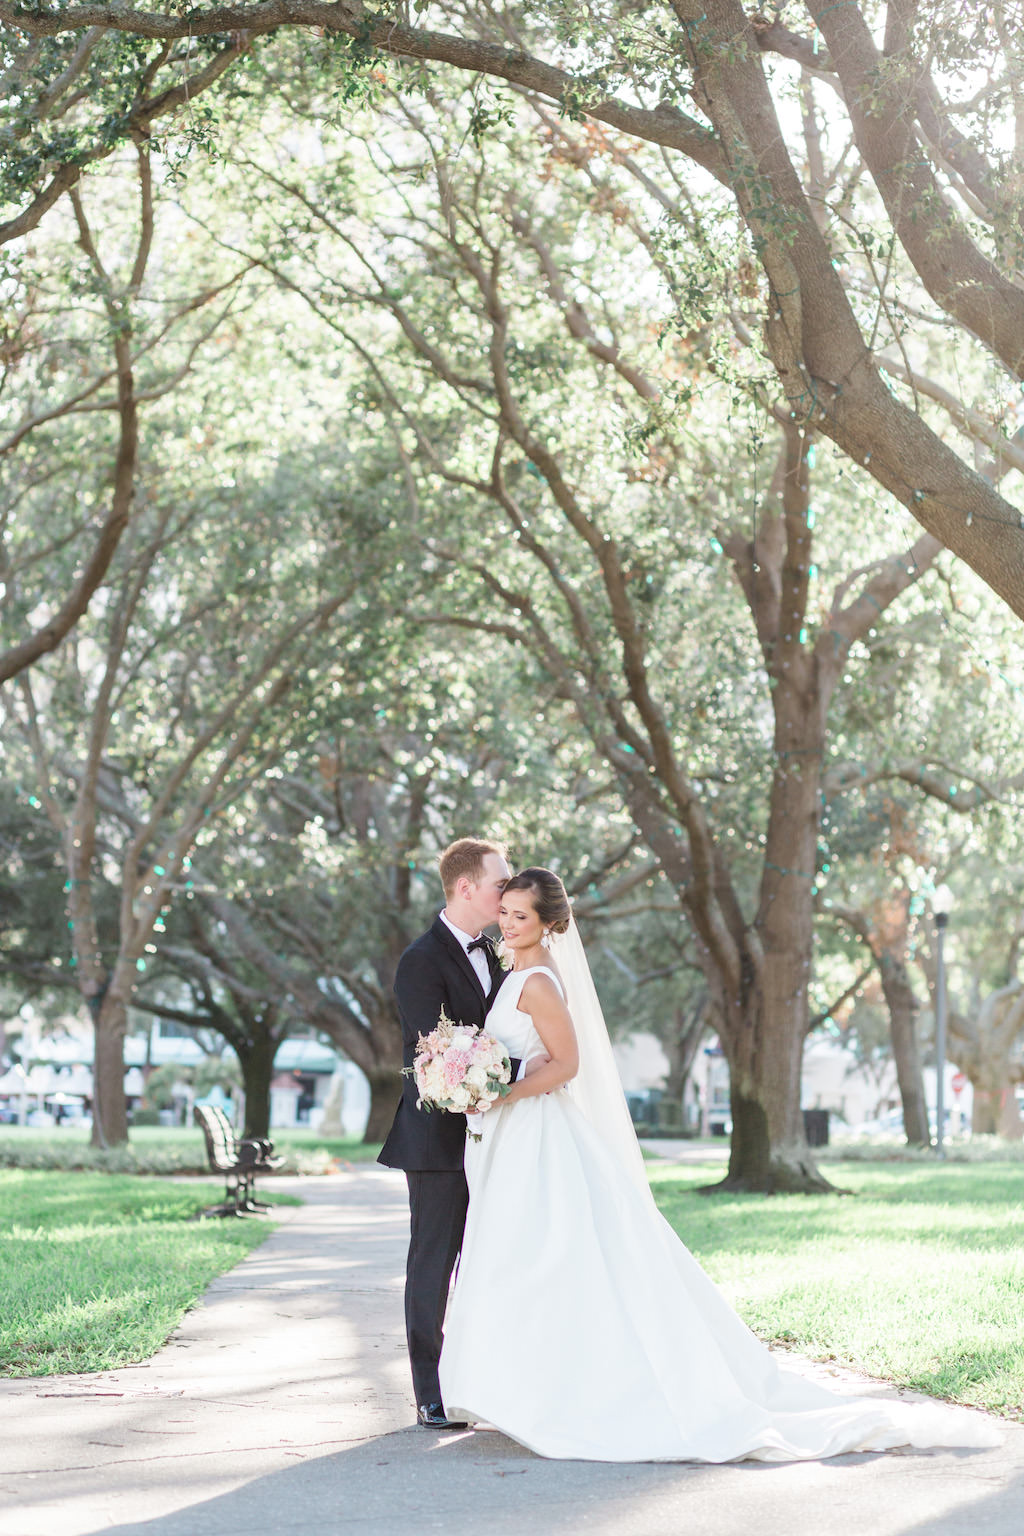 Outdoor Park Bride and Groom Wedding Portrait, Bride in A Frame Rosa Clara Bridal Dress with White and BLush Pink Bouquet